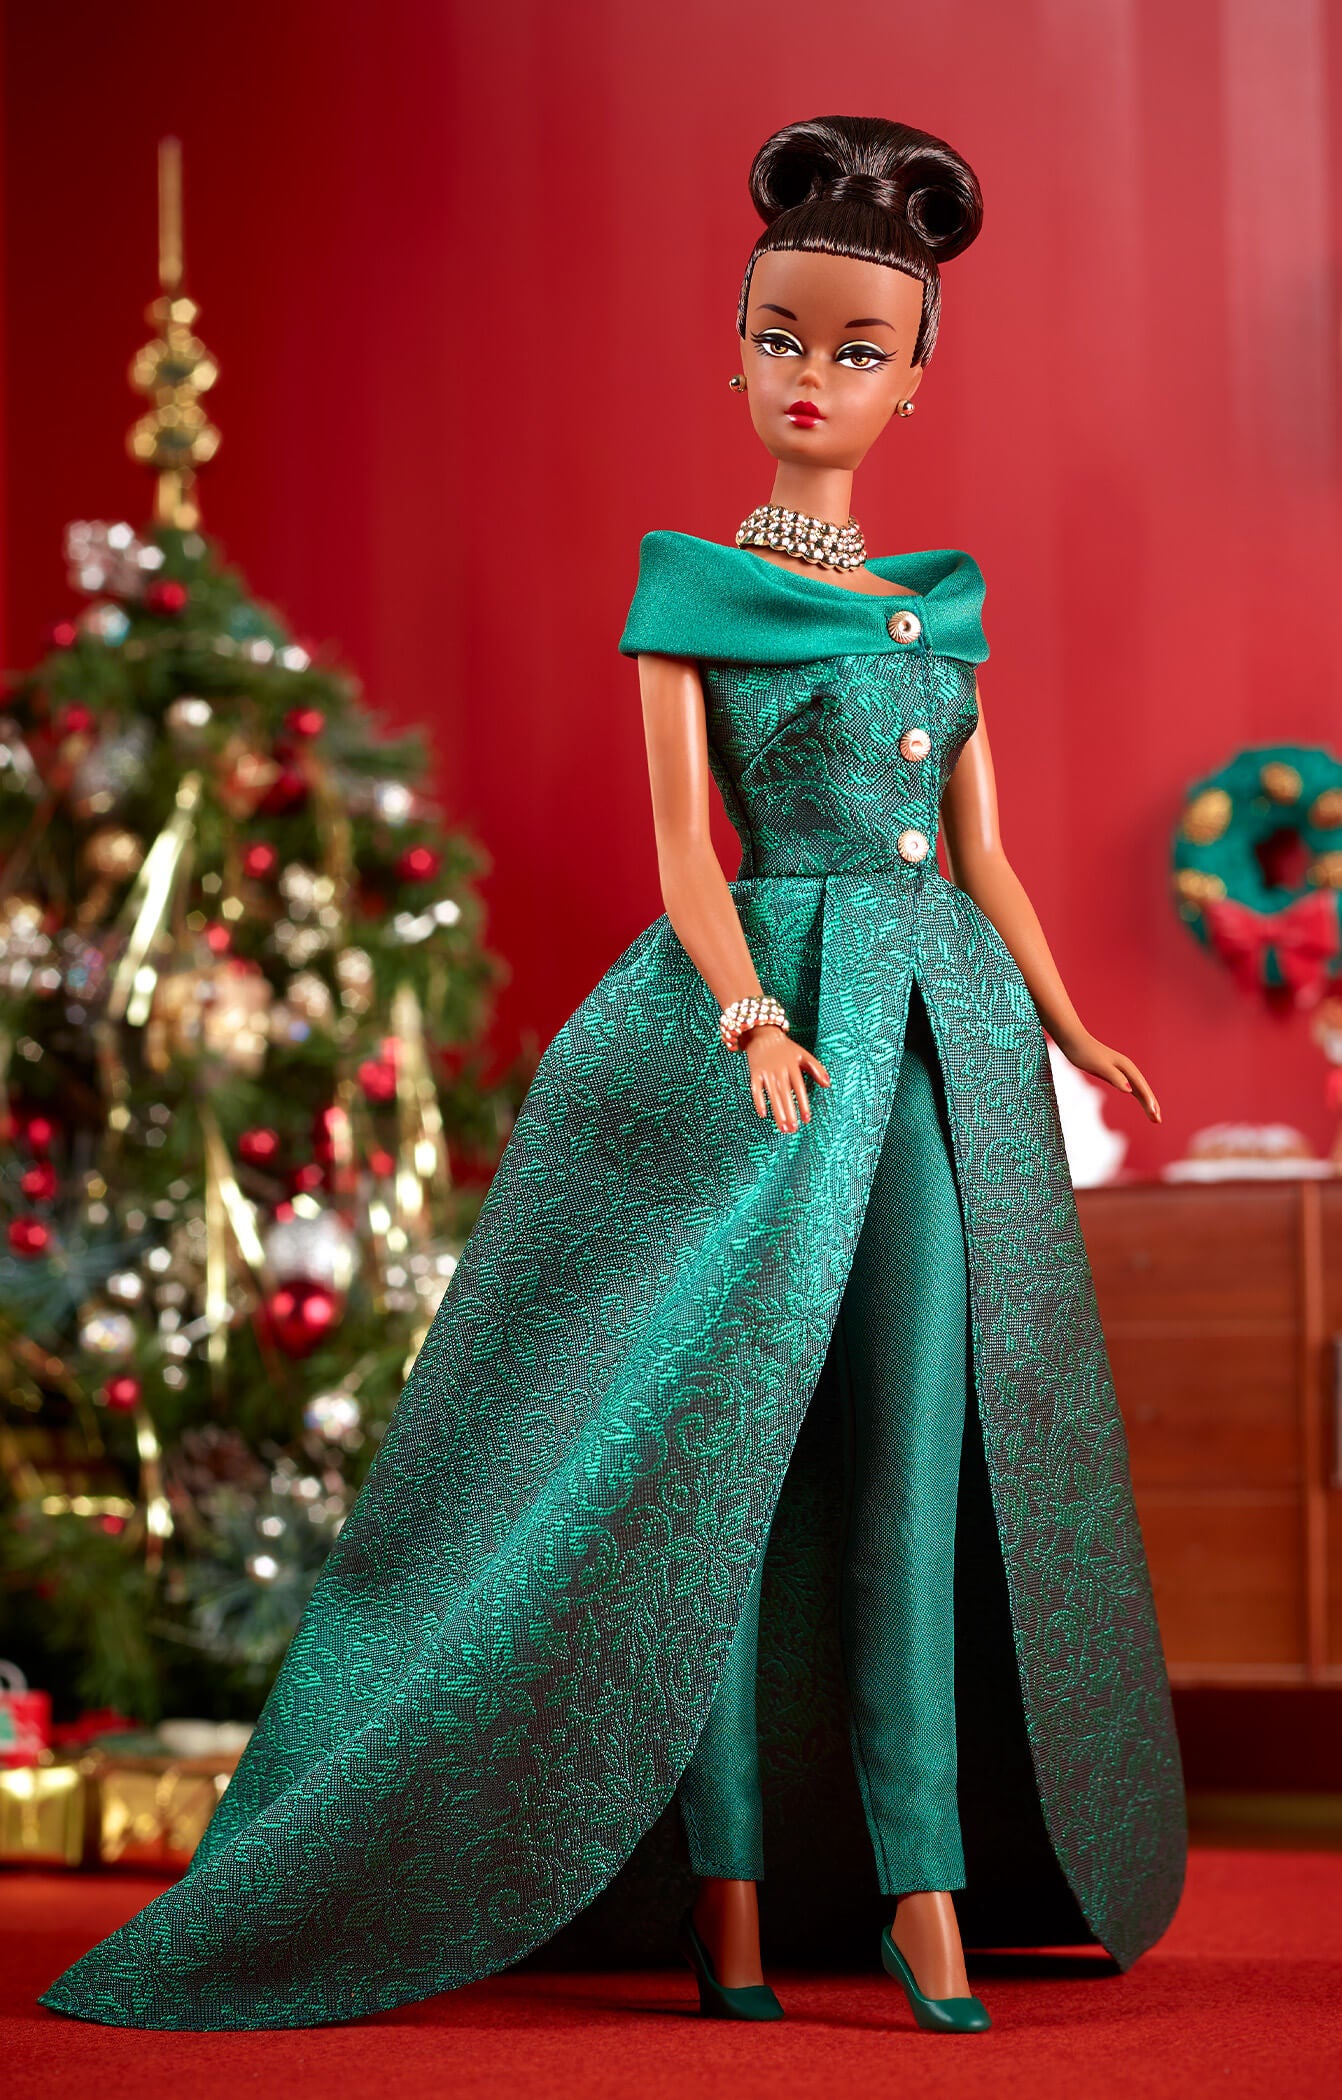 Socialism's Christmas gift to the people: $2.50 Barbie dolls